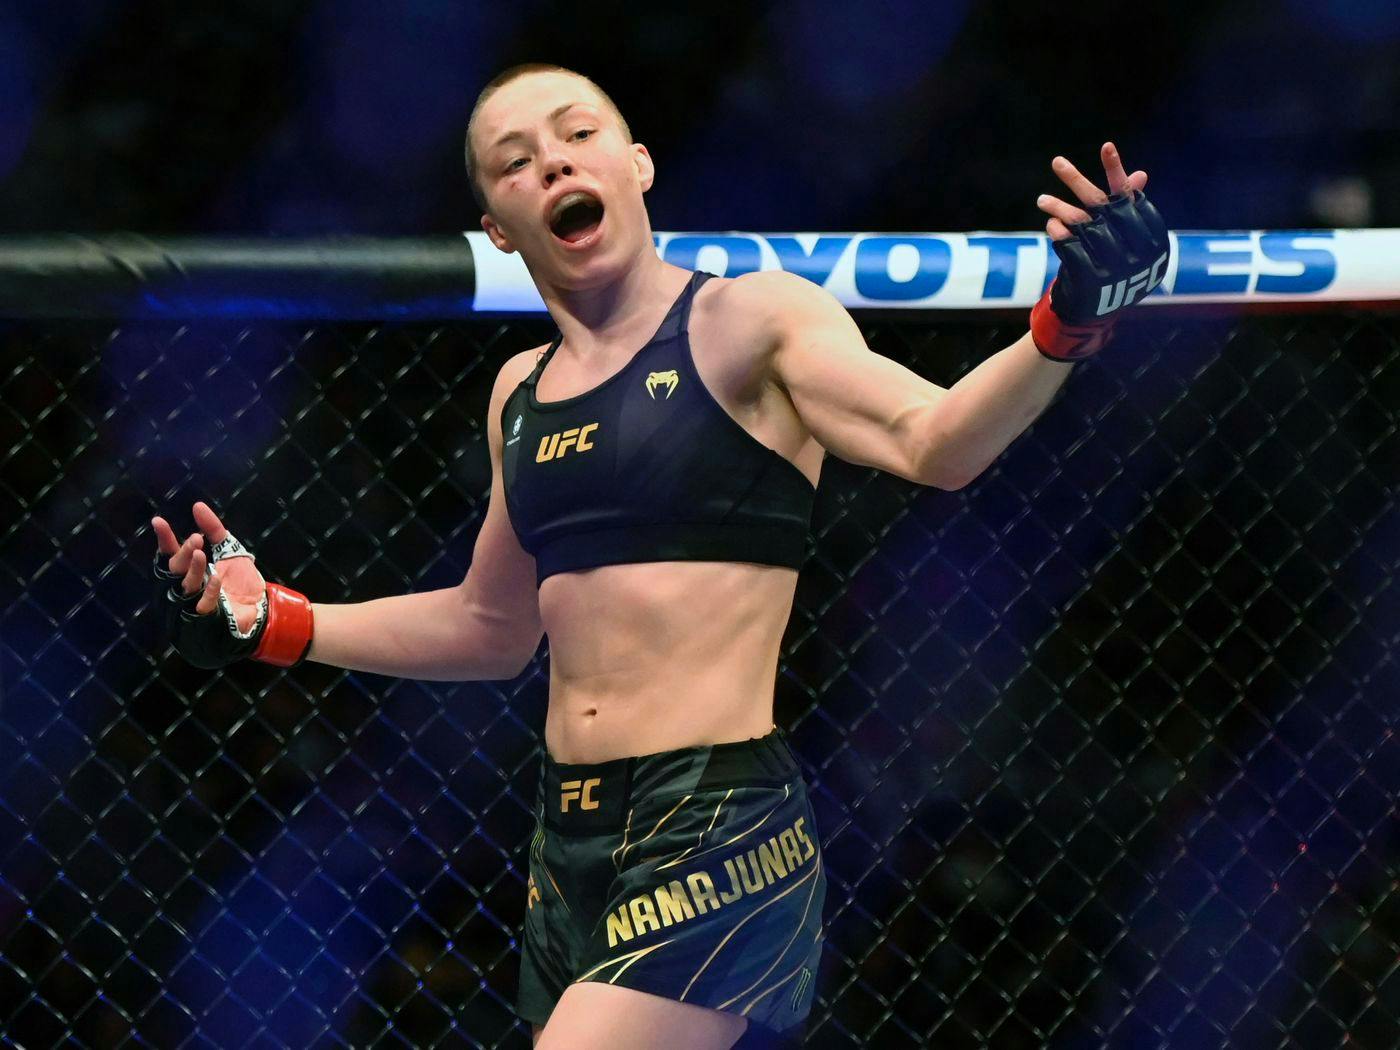 cover art for 862: MMA PREVIEW: Is Namajunas two-weight UFC champ material? Why McGregor’s return is stalling and what antitrust lawsuit settlement means for UFC